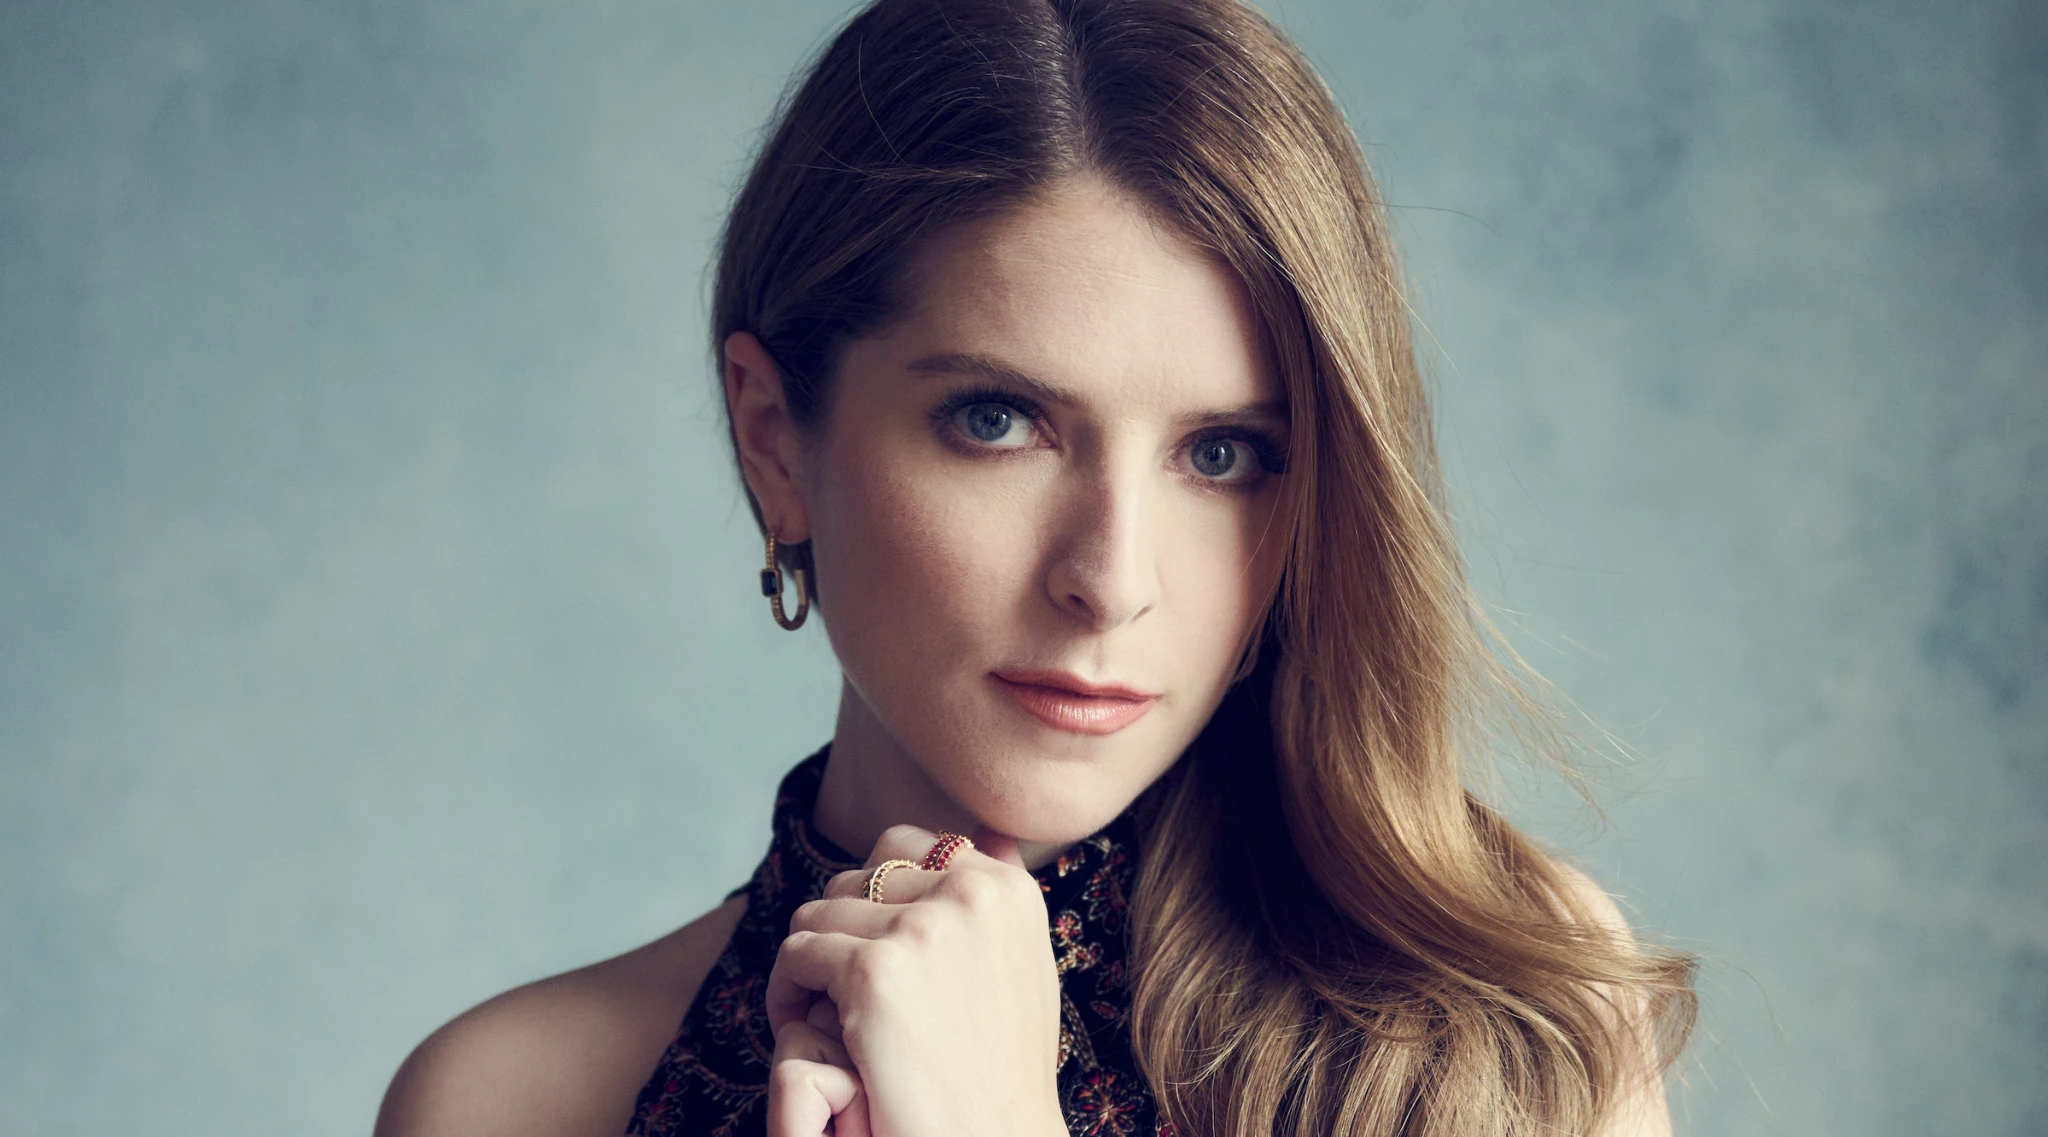 Anna Kendrick Took a Break From Acting and Found Herself: 'That Was Really Exciting but Really Scary' (Exclusive)